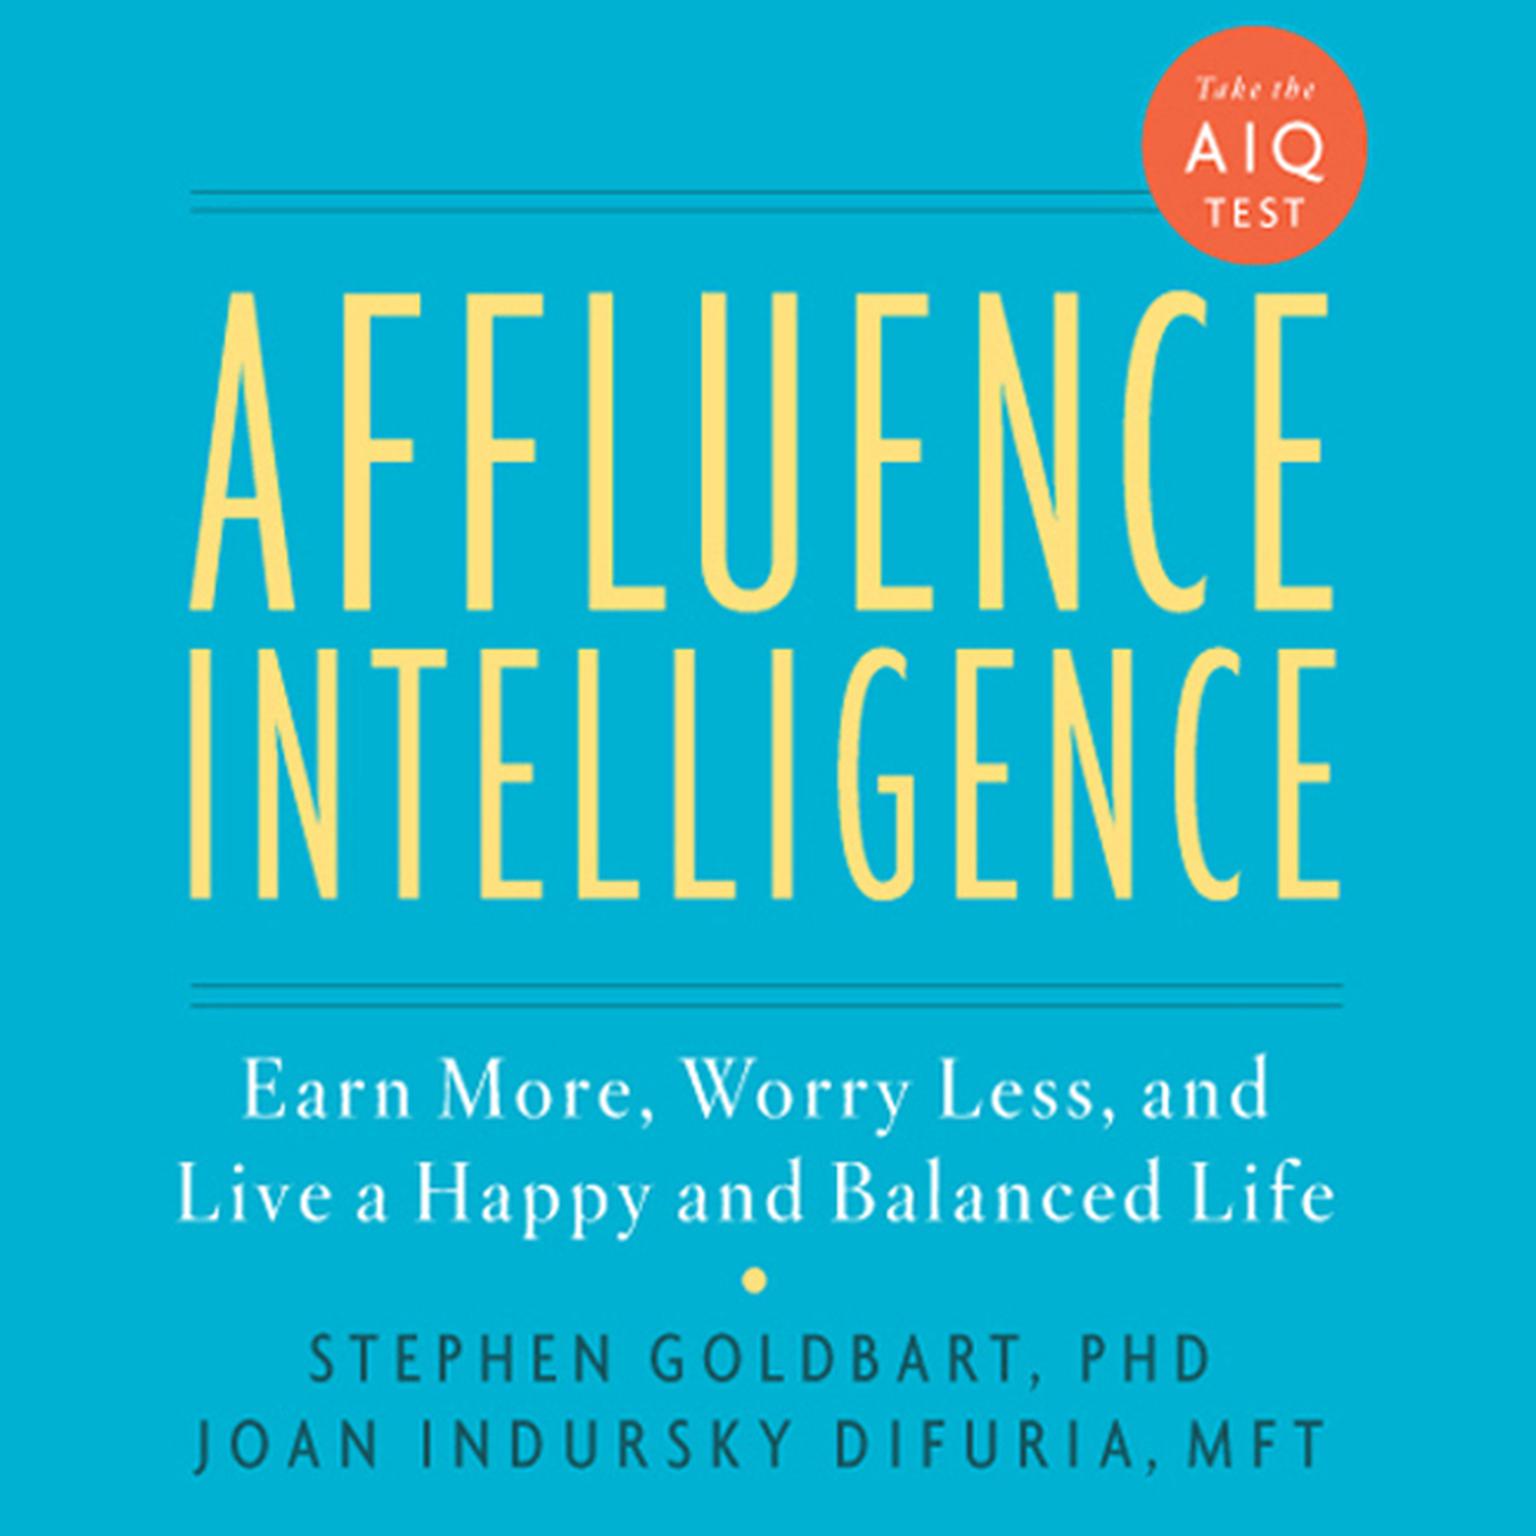 Affluence Intelligence: Earn More, Worry Less, and Live a Happy and Balanced Life Audiobook, by Stephen Goldbart